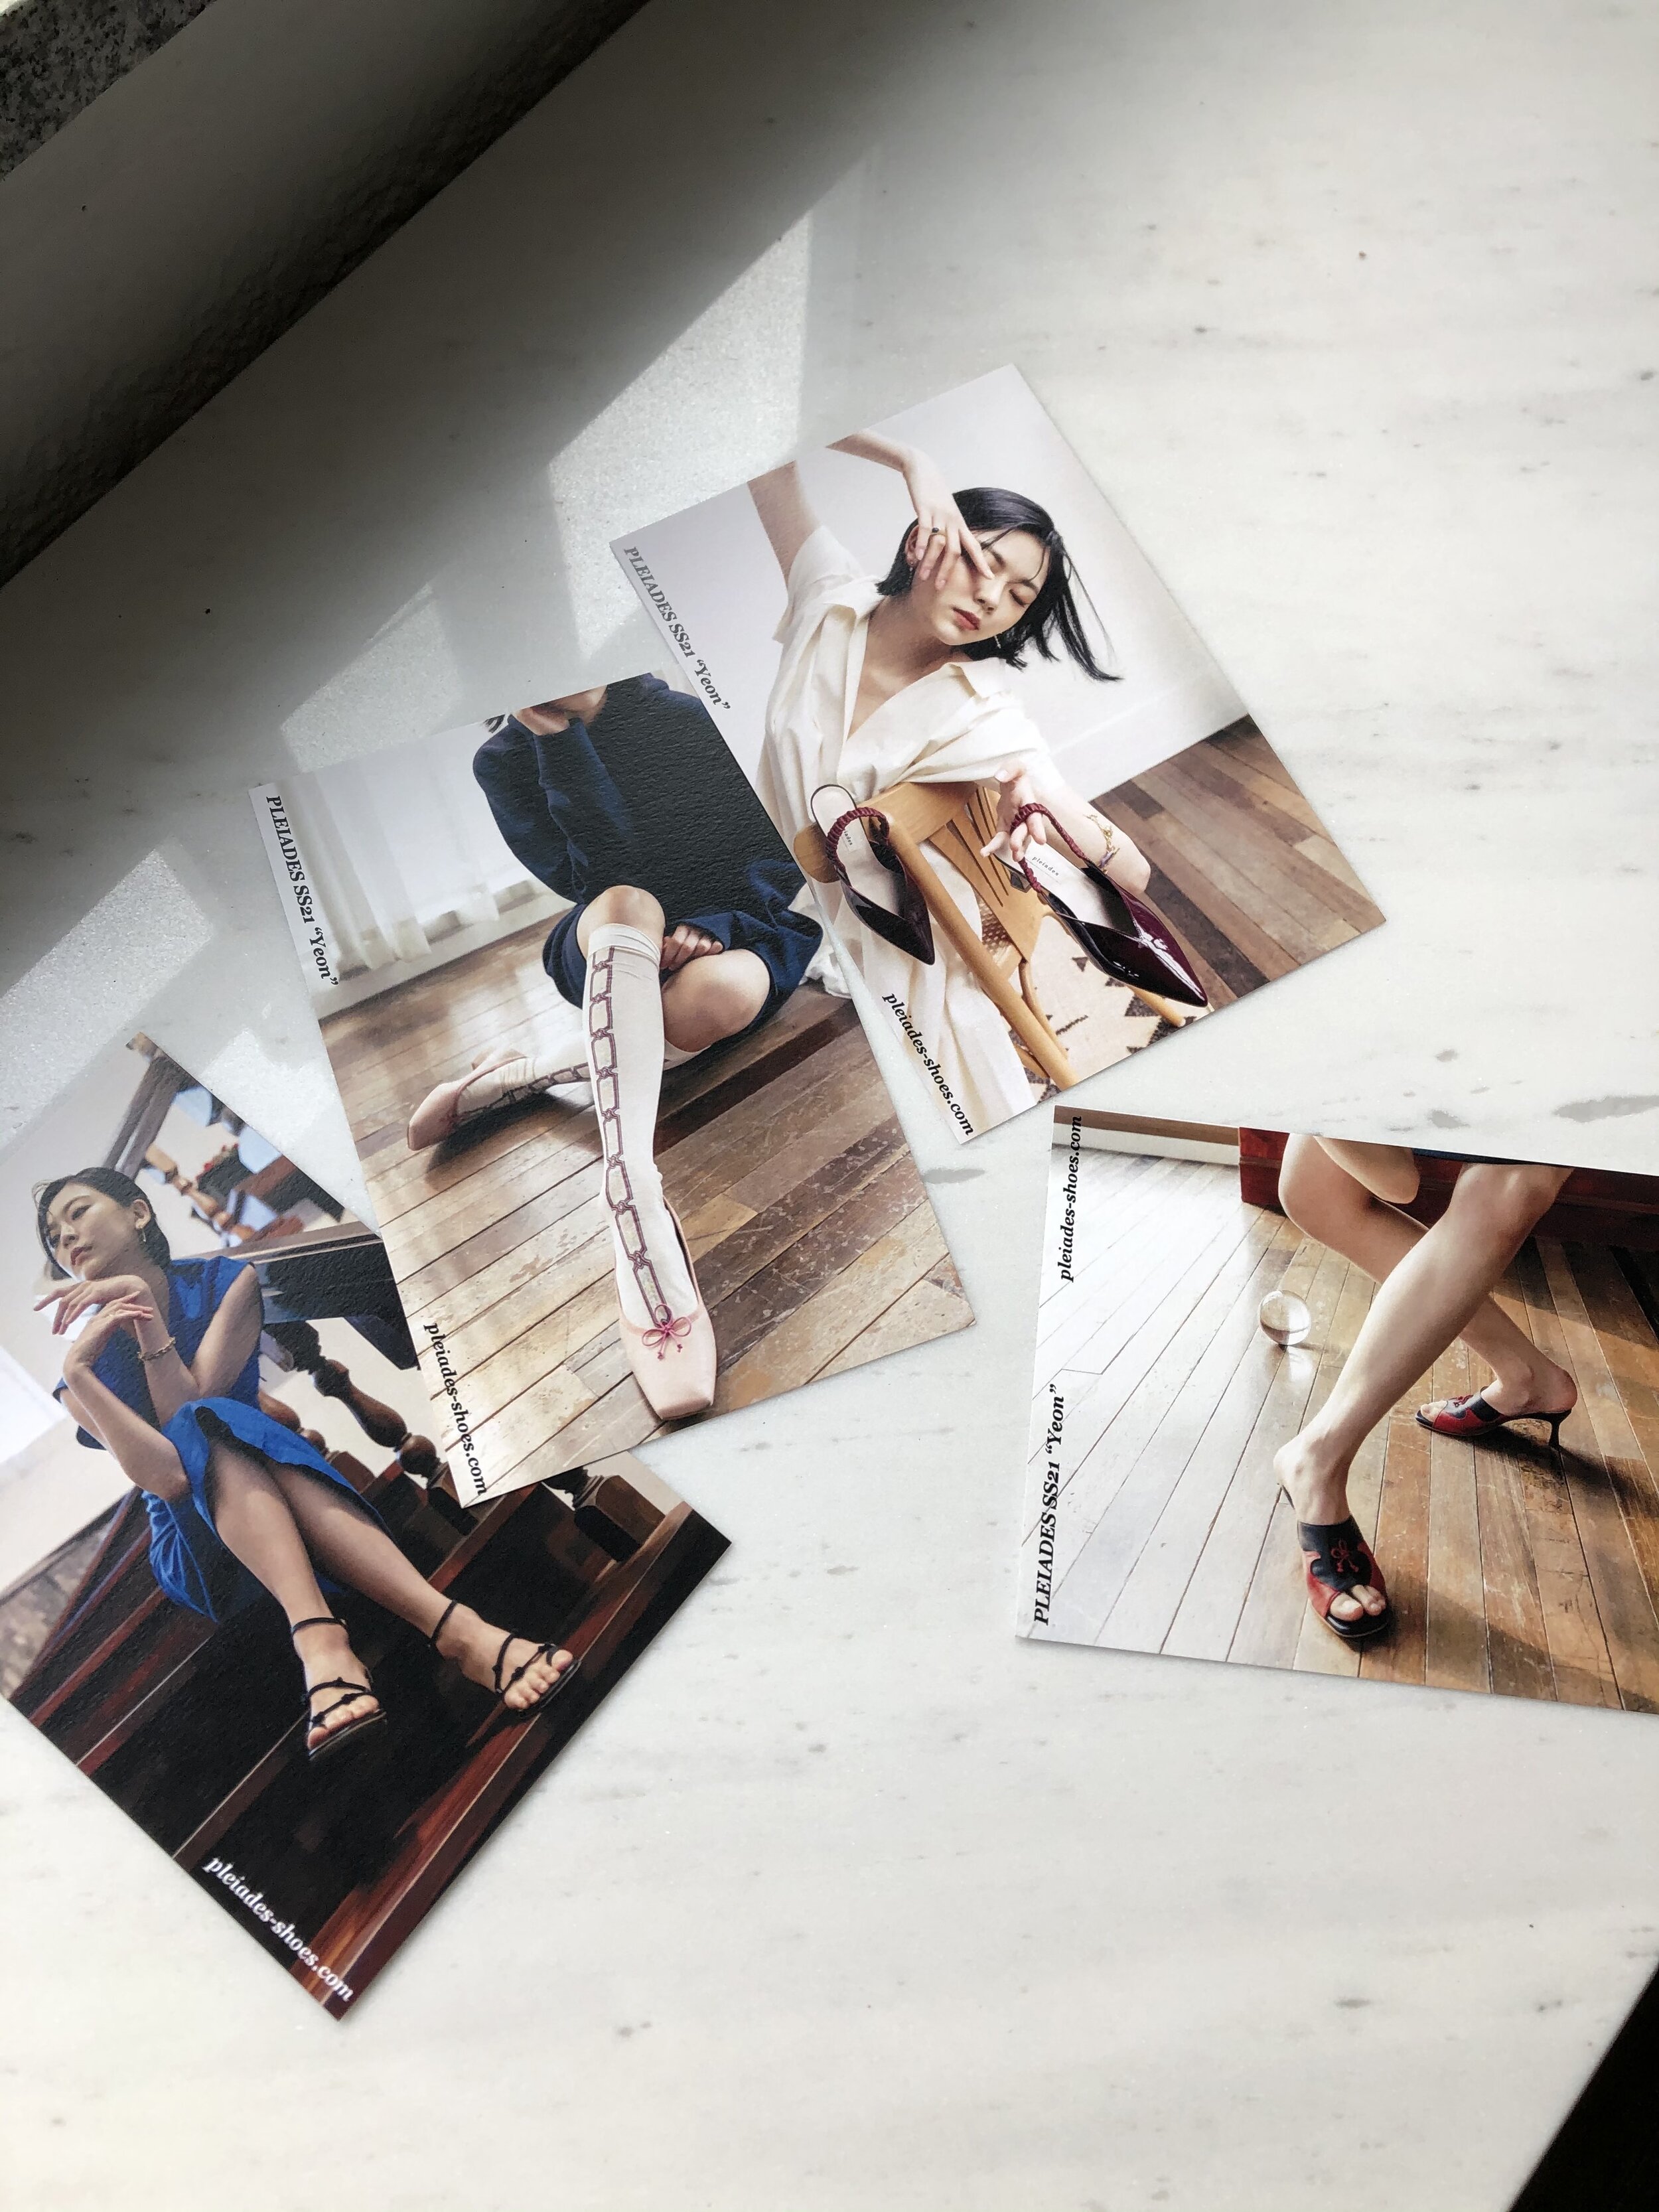 Images of 'Yeon' campaign